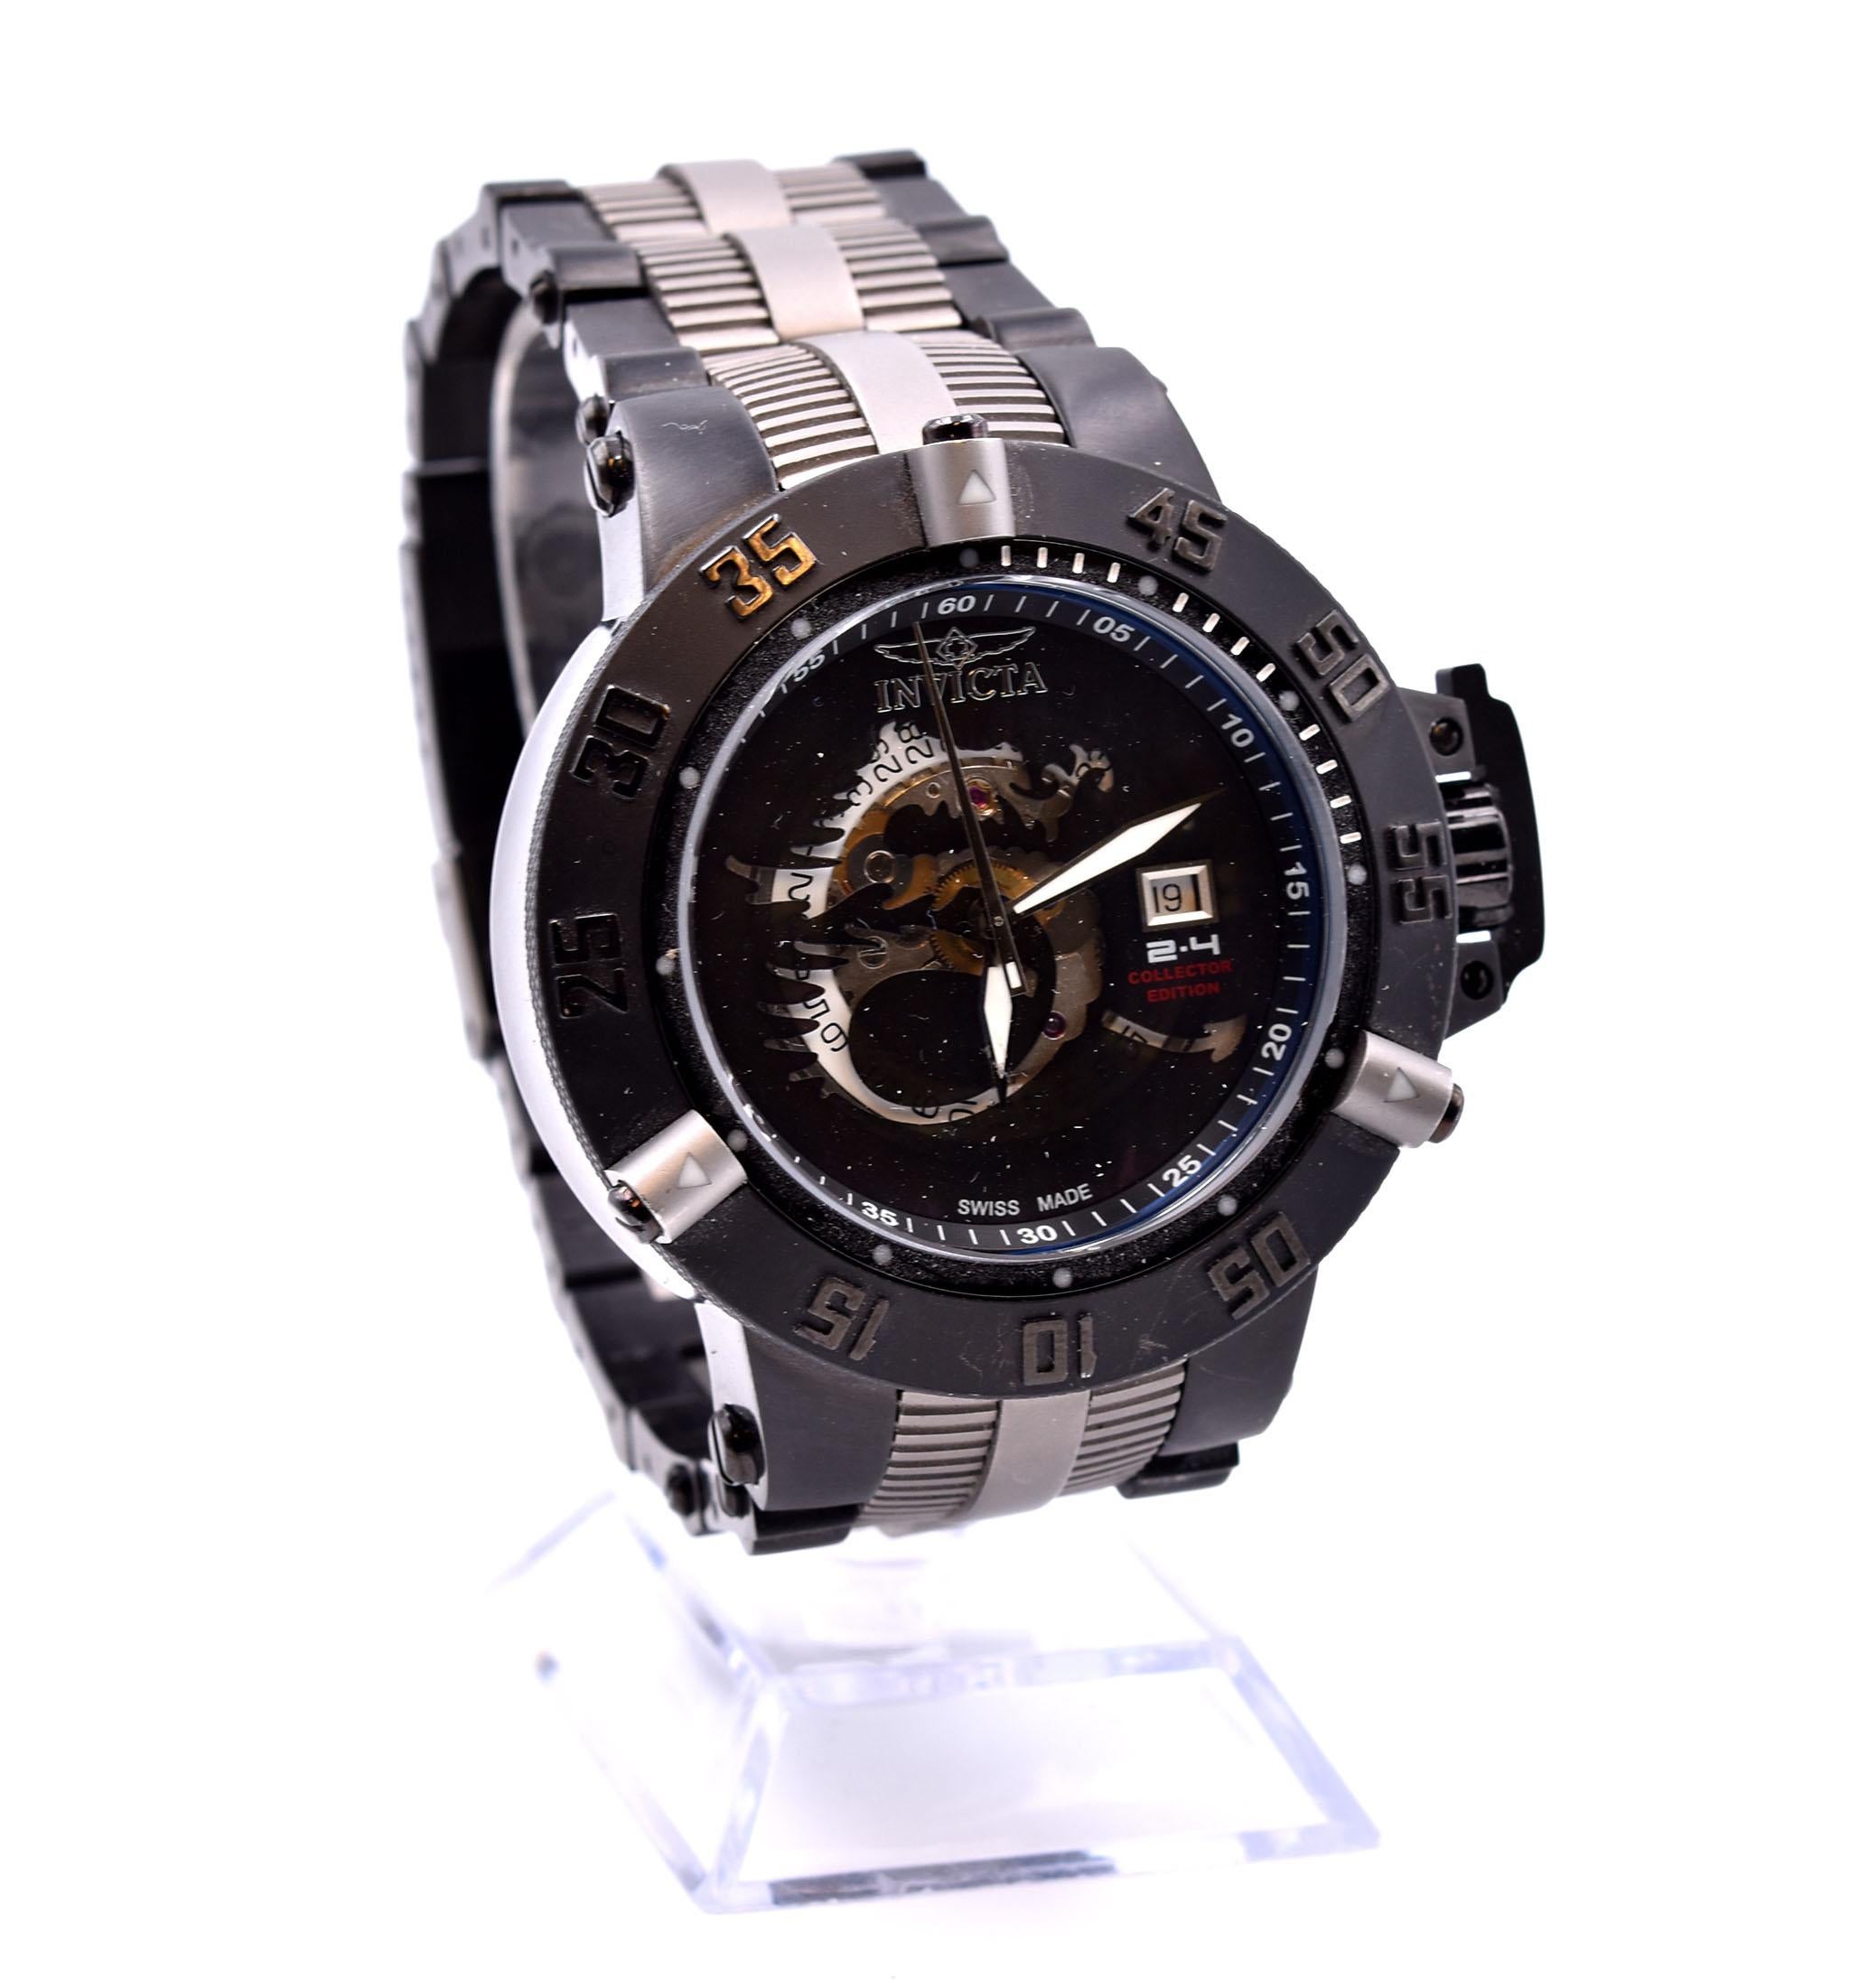 Movement: automatic
Function: hours, minutes, date
Case: 50mm black ion-plated stainless-steel case, flame fusion crystal, exhibition case back, screw down crown with protective cap, uni-directional rotating bezel, 500m water resistance
Dial: black